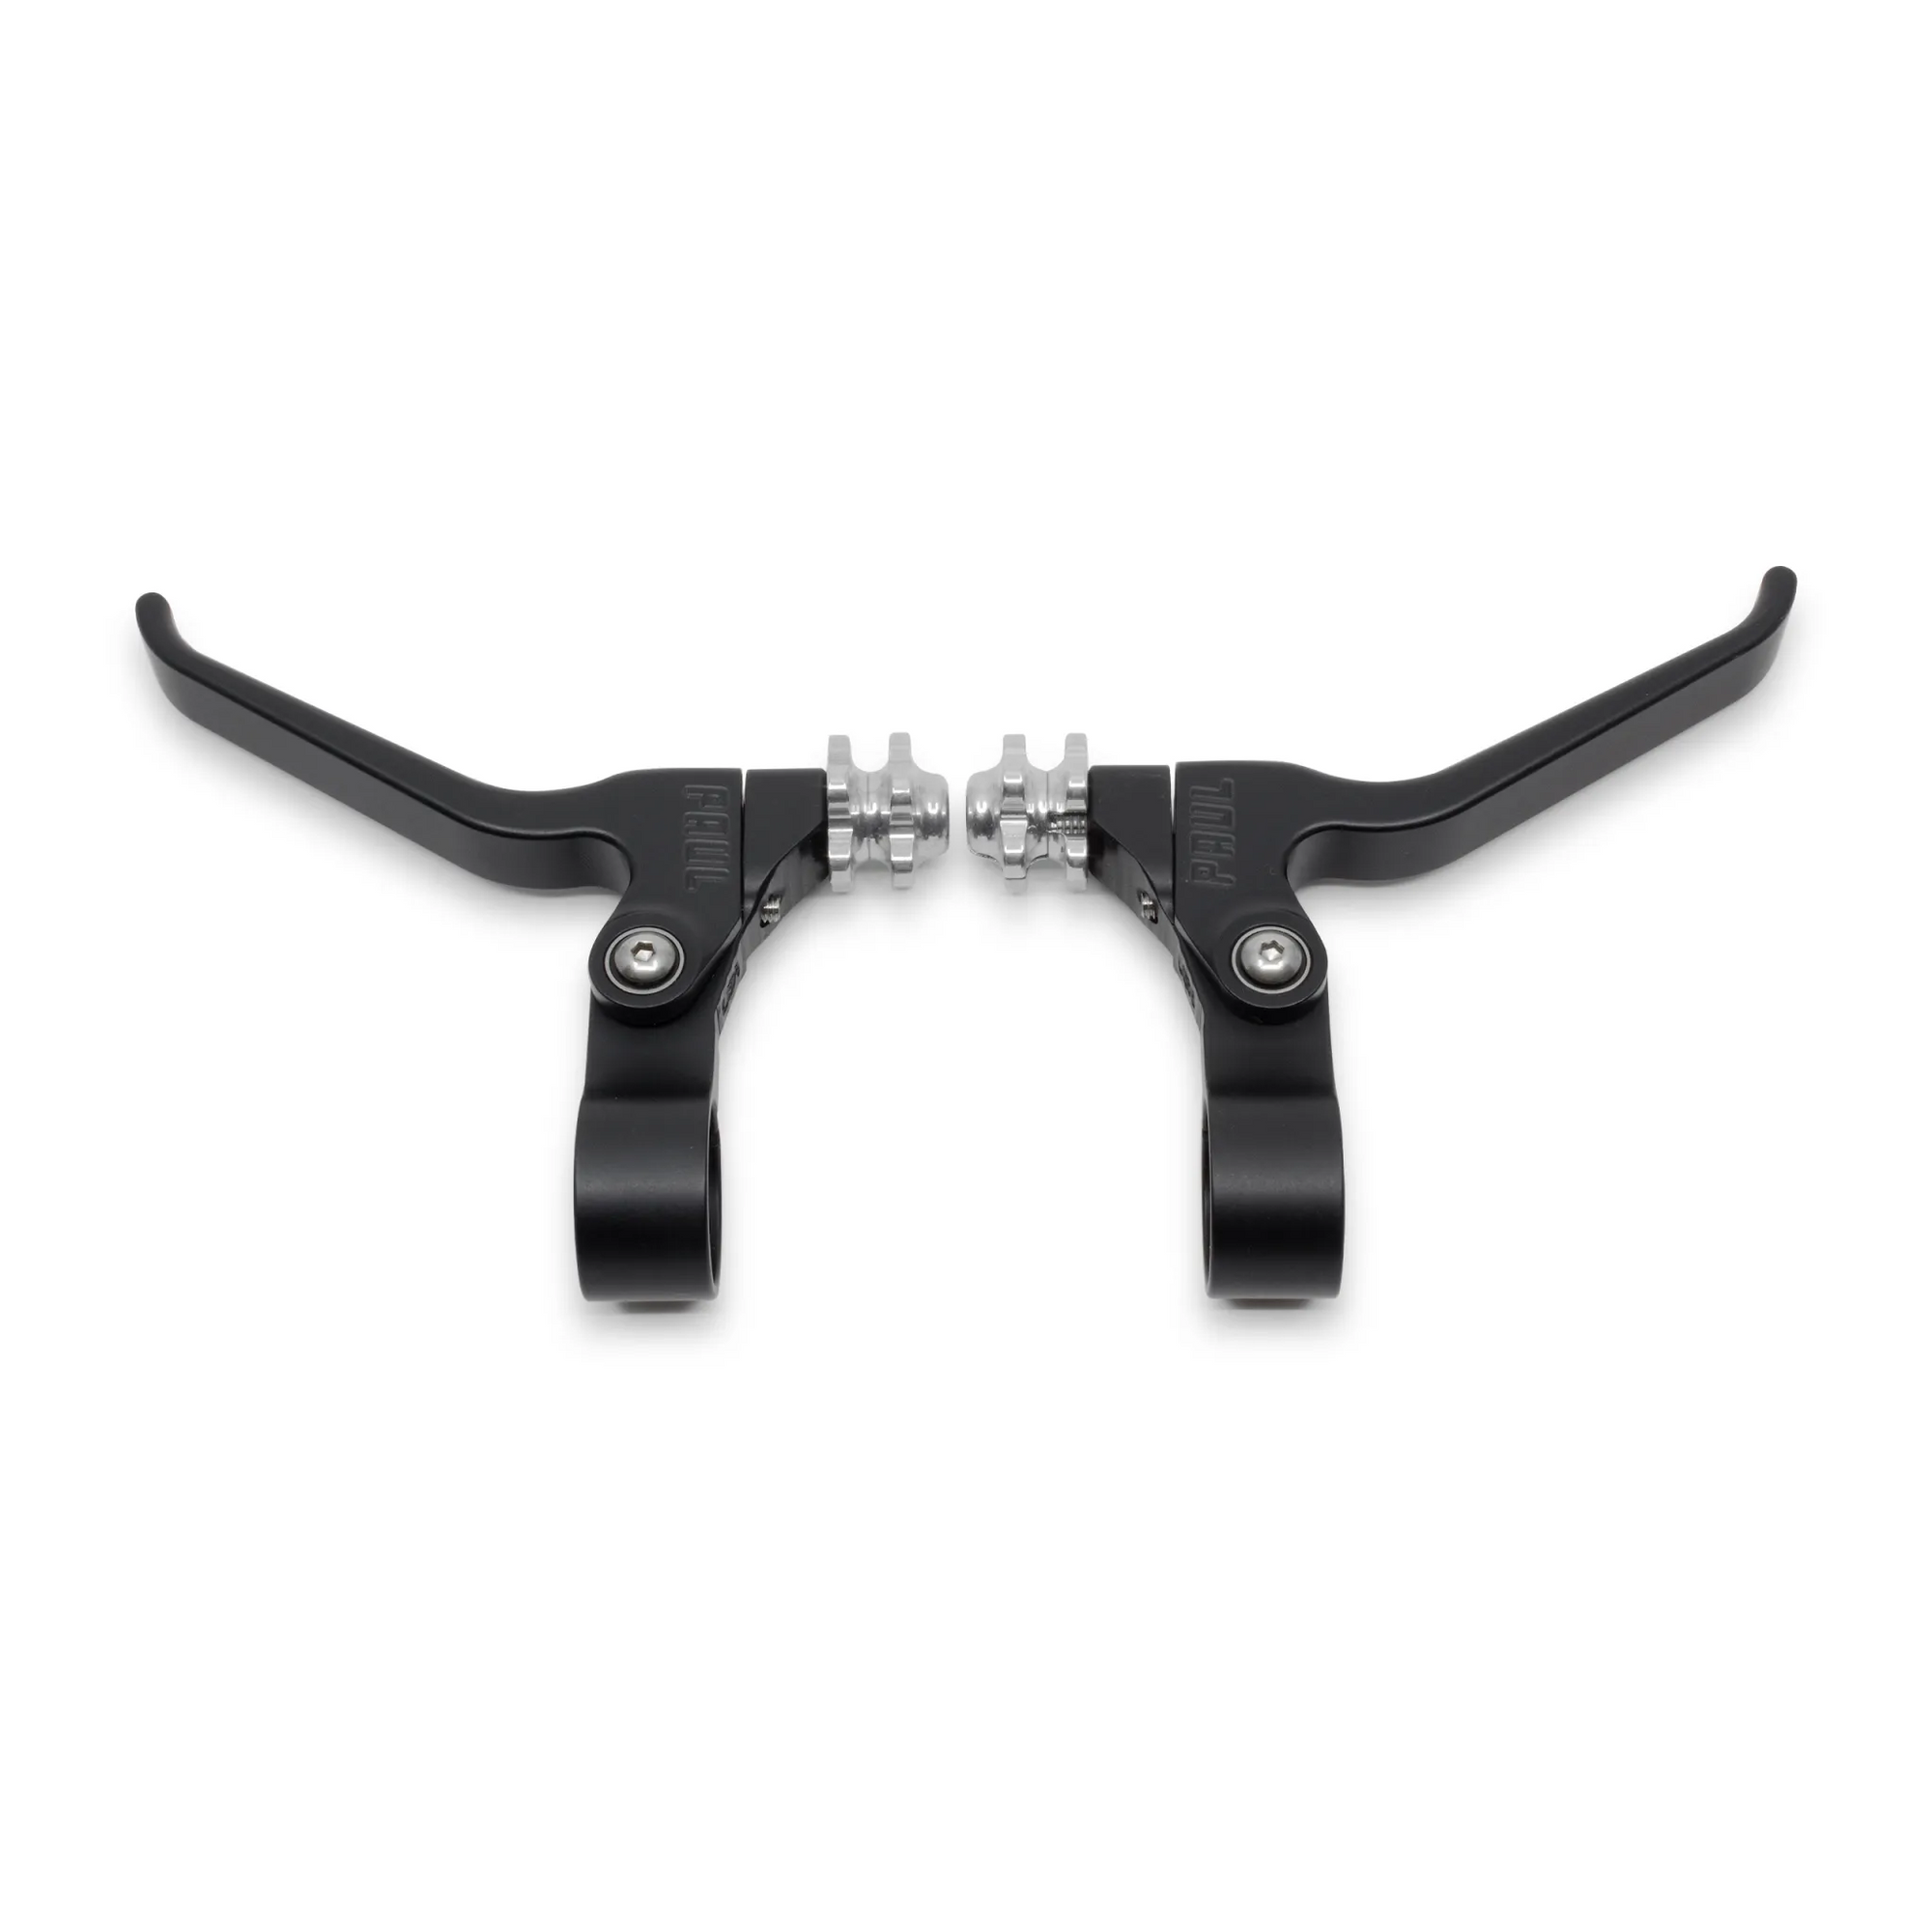 Paul Components Canti Lever Brake Lever